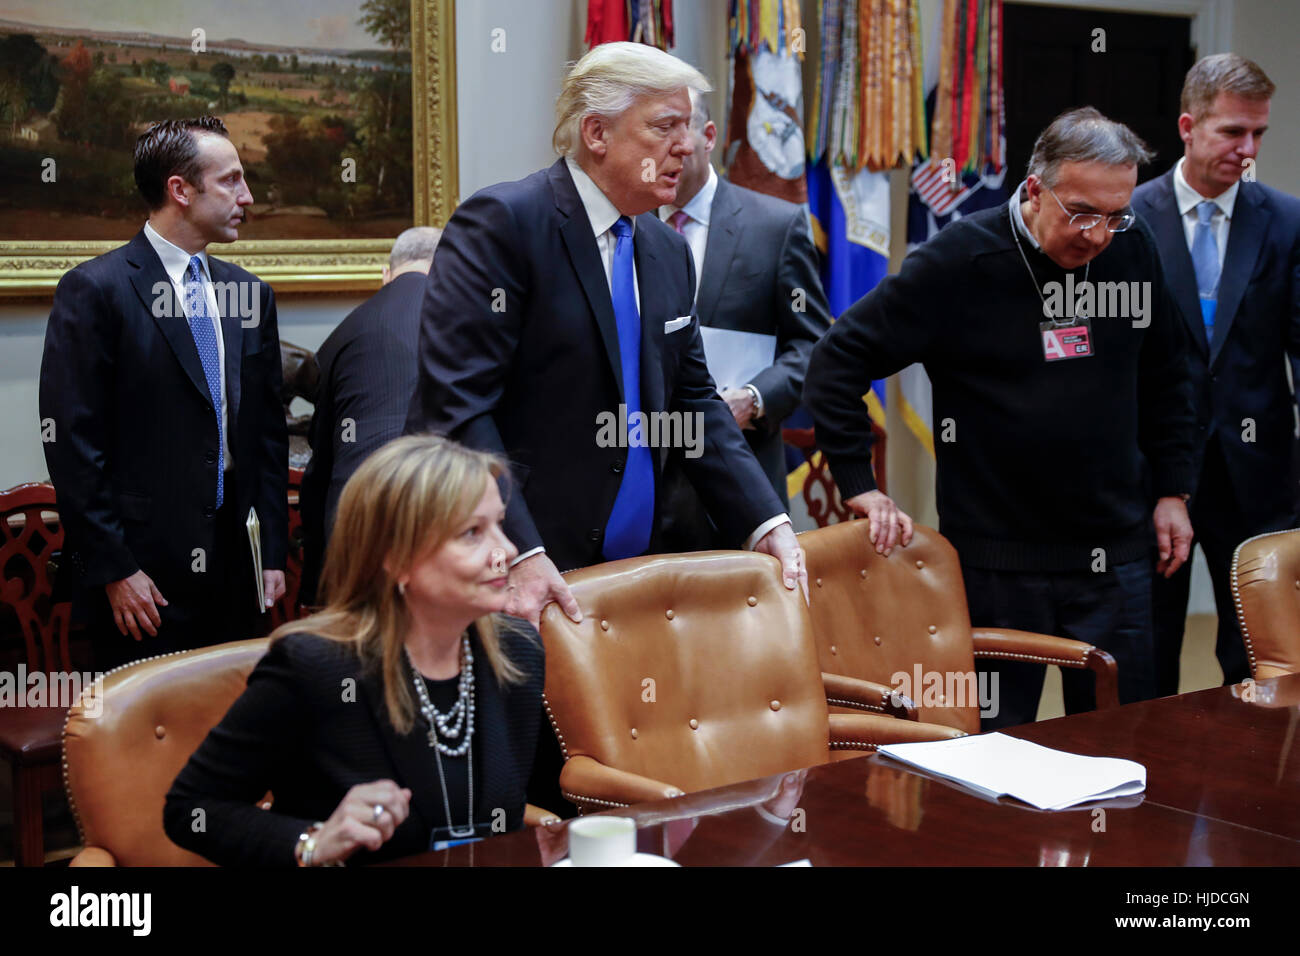 Washington, USA. 24th Jan, 2017. US President Donald Trump (C), with CEO of General Motors Mary Barra (L) and CEO of Fiat Chrysler Automobiles Sergio Marchionne (2R), arrives for a meeting with automobile industry leaders in the Roosevelt Room of the White House in Washington, DC, USA. Credit: Shawn Thew/Pool via CNP /MediaPunch/Alamy Live News Stock Photo